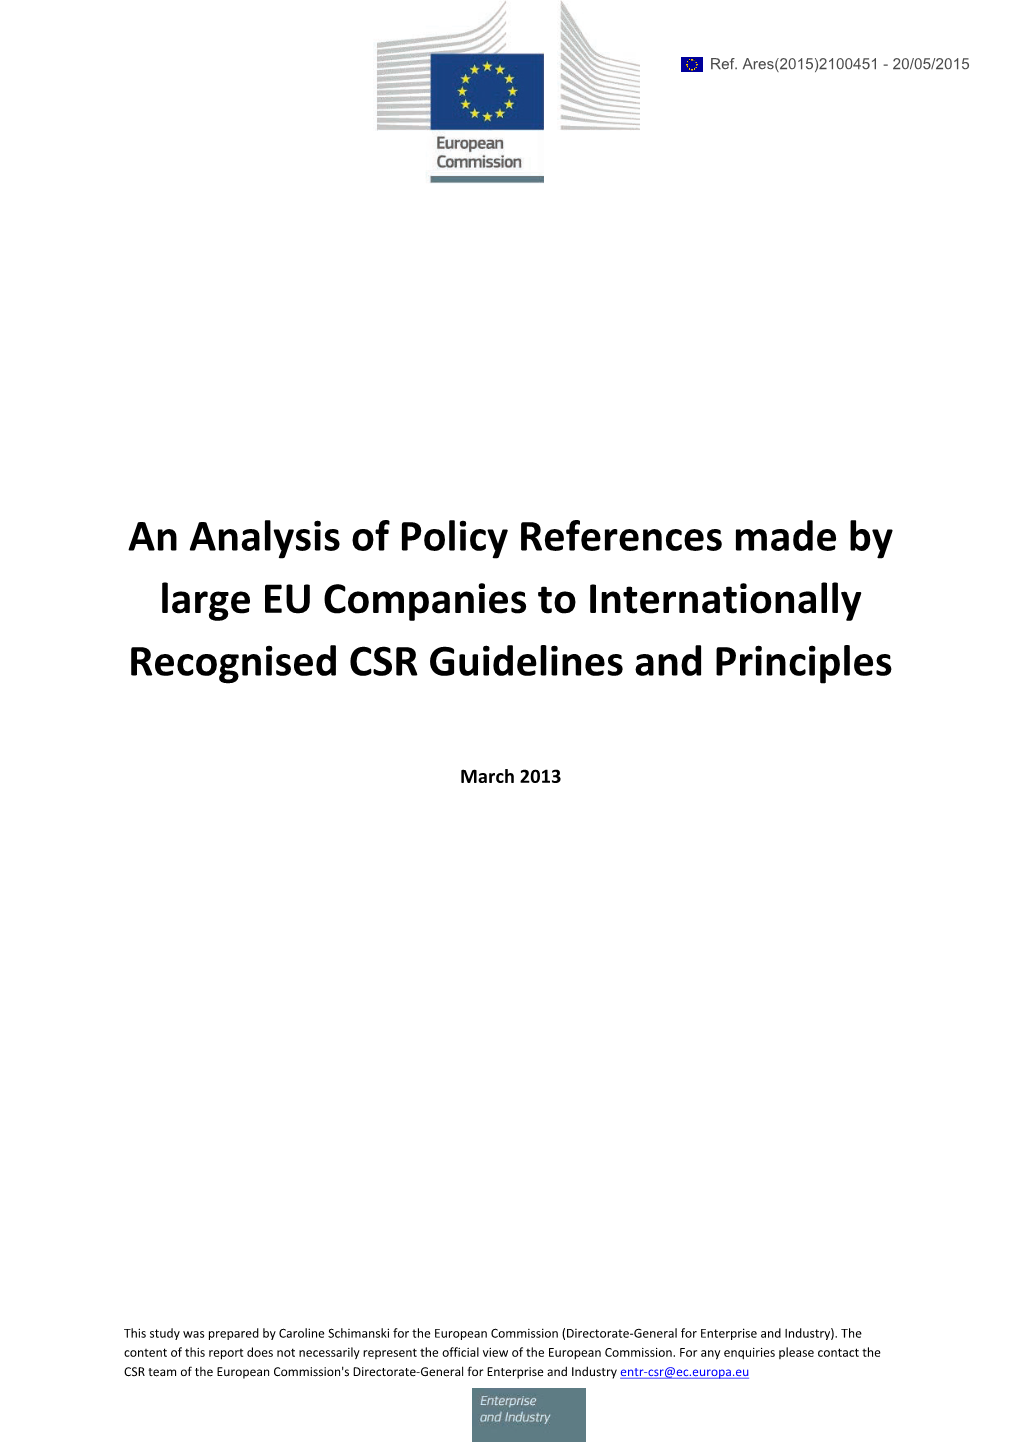 References to CSR Guidelines and Principles FINAL